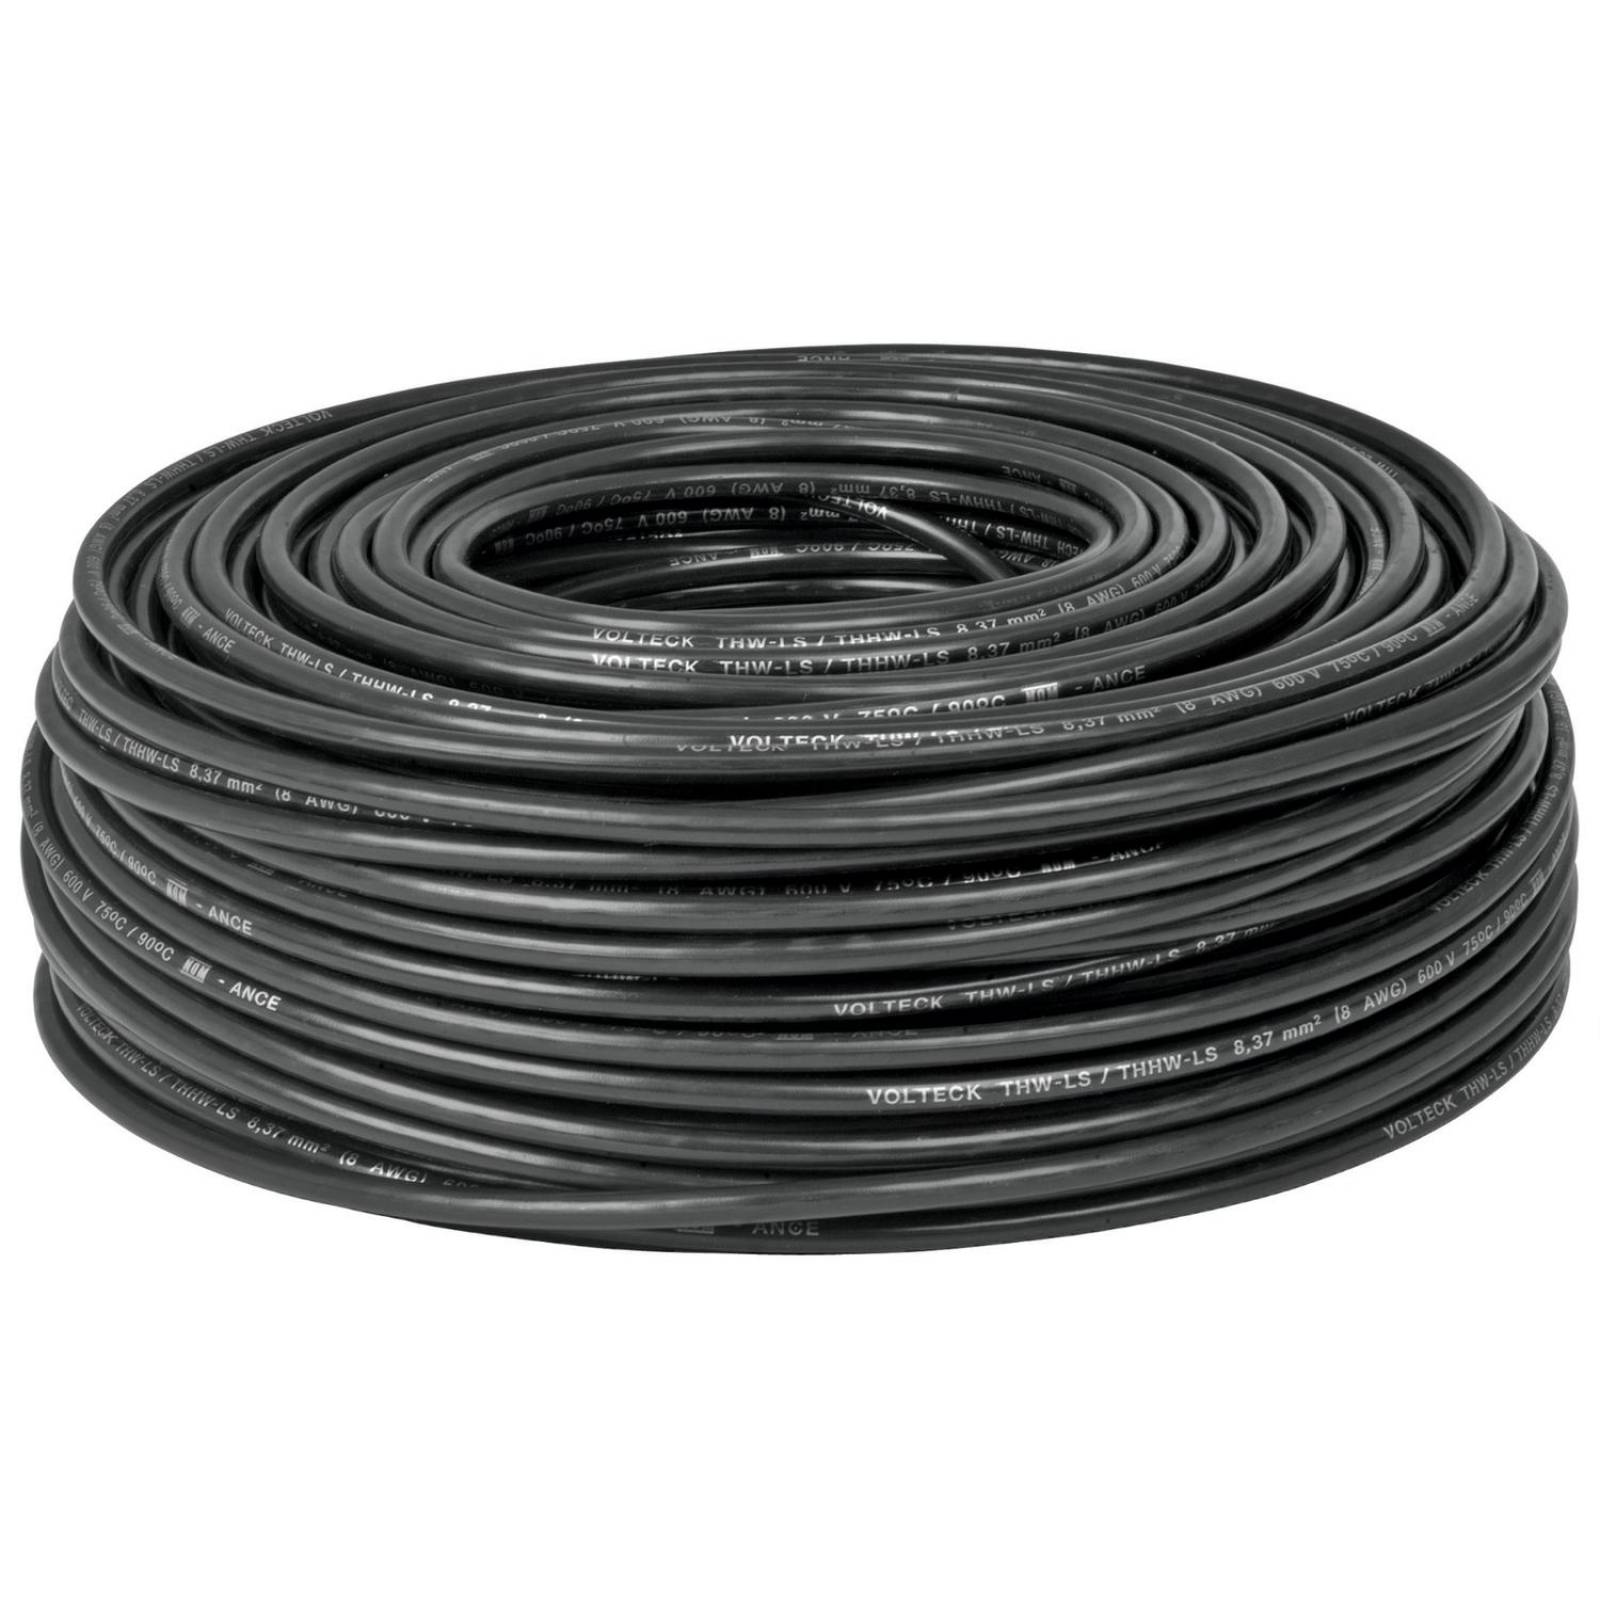 Cable THHW-LS, 8 AWG, color negro rollo 100 m Volteck 